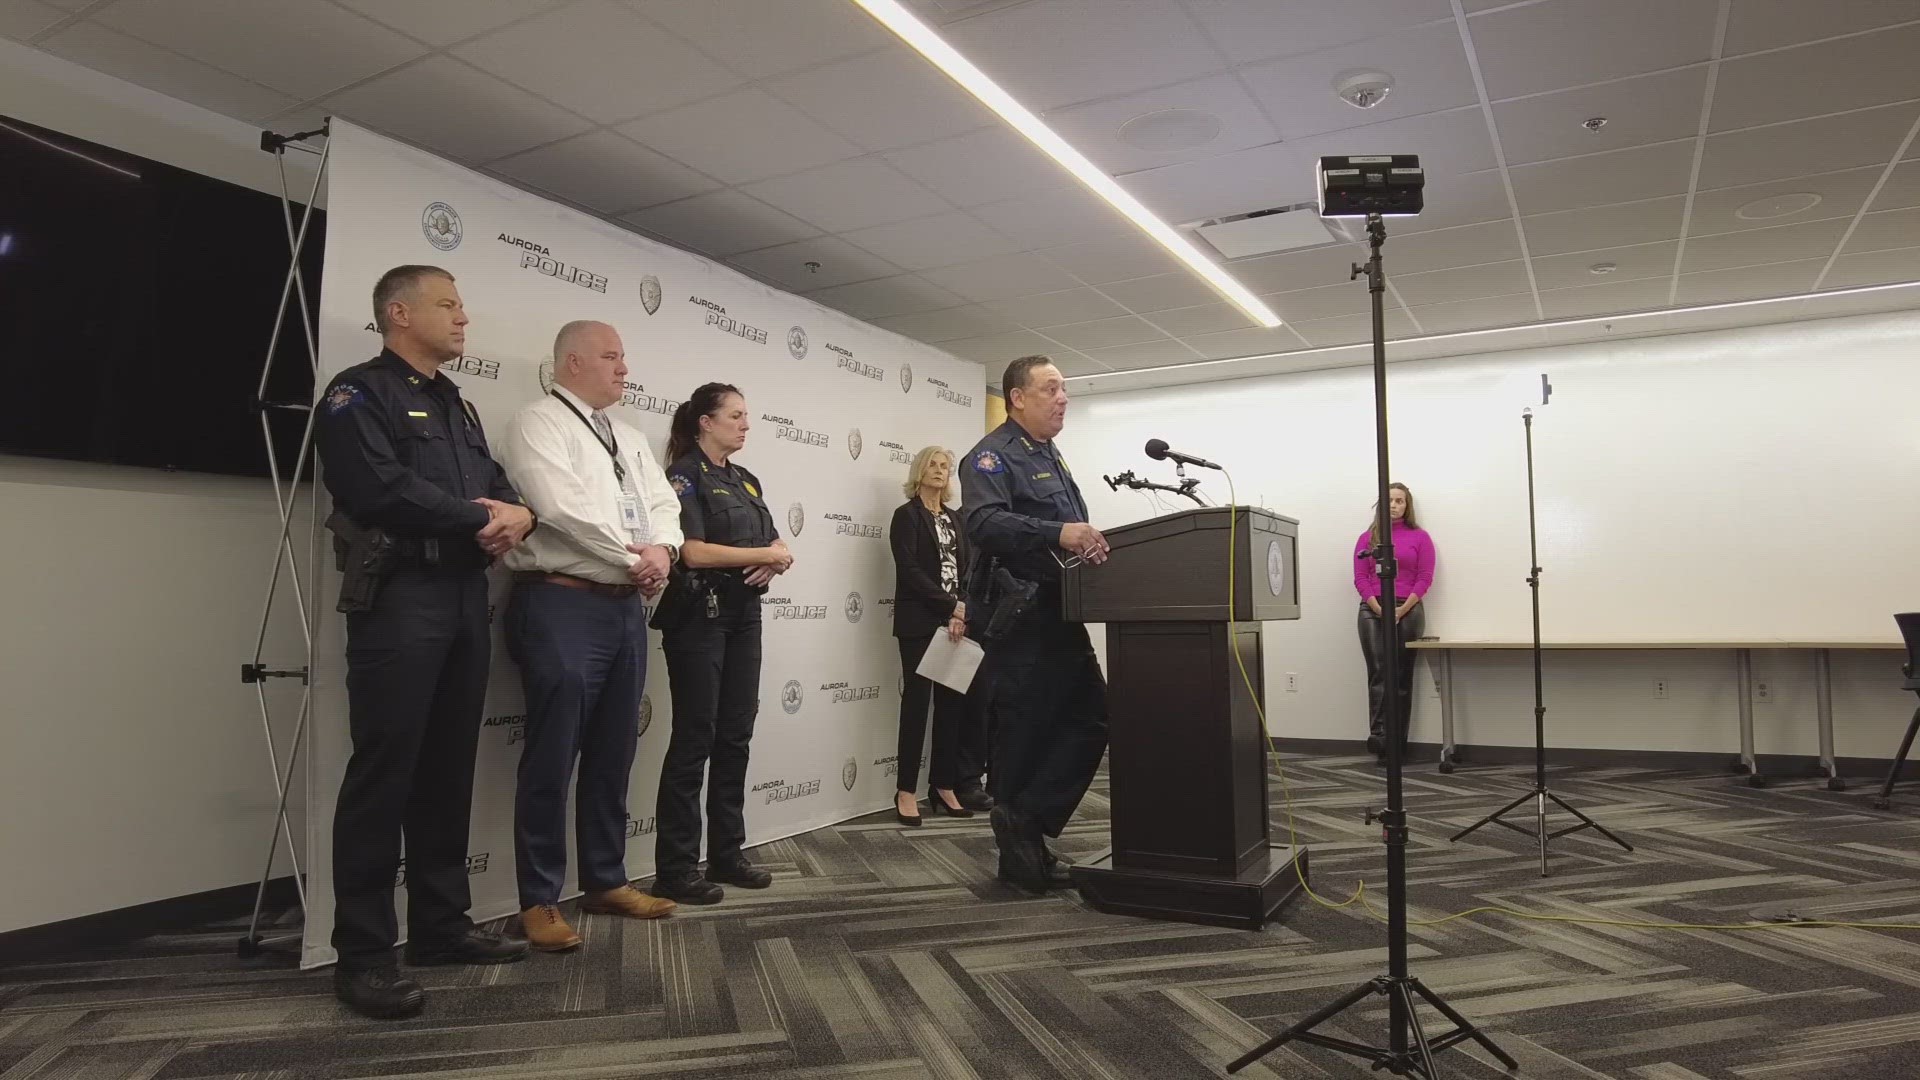 Police said five suspects were involved in the fatal shooting of a teen at Southlands Mall, and investigators have secured an arrest warrant for one so far.